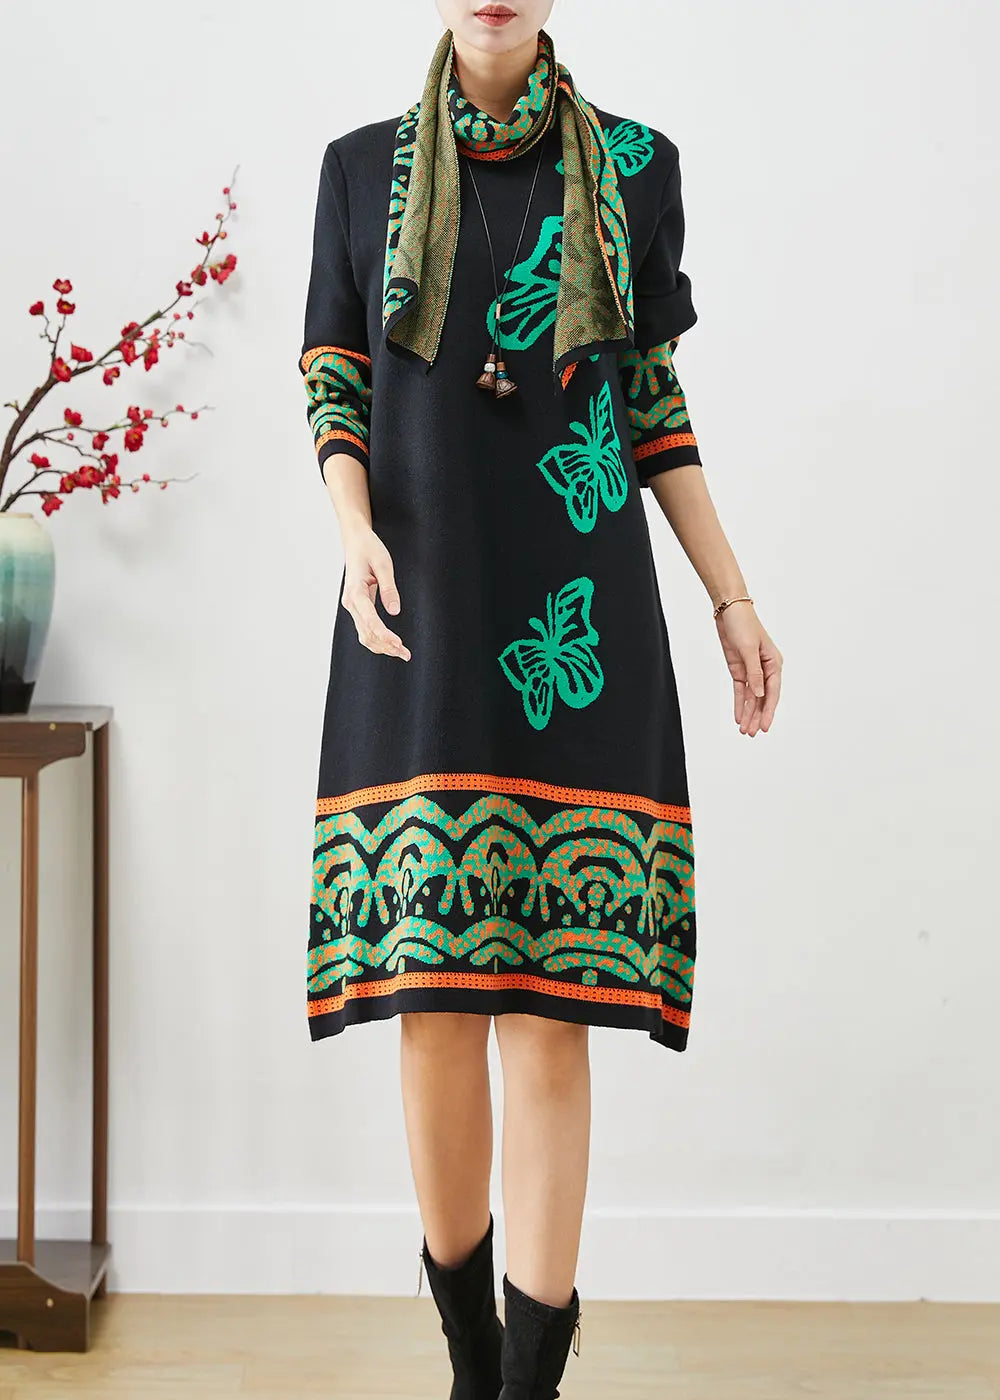 Boutique Black Print Complimentary Scarf Knit Dresses Fall Ada Fashion